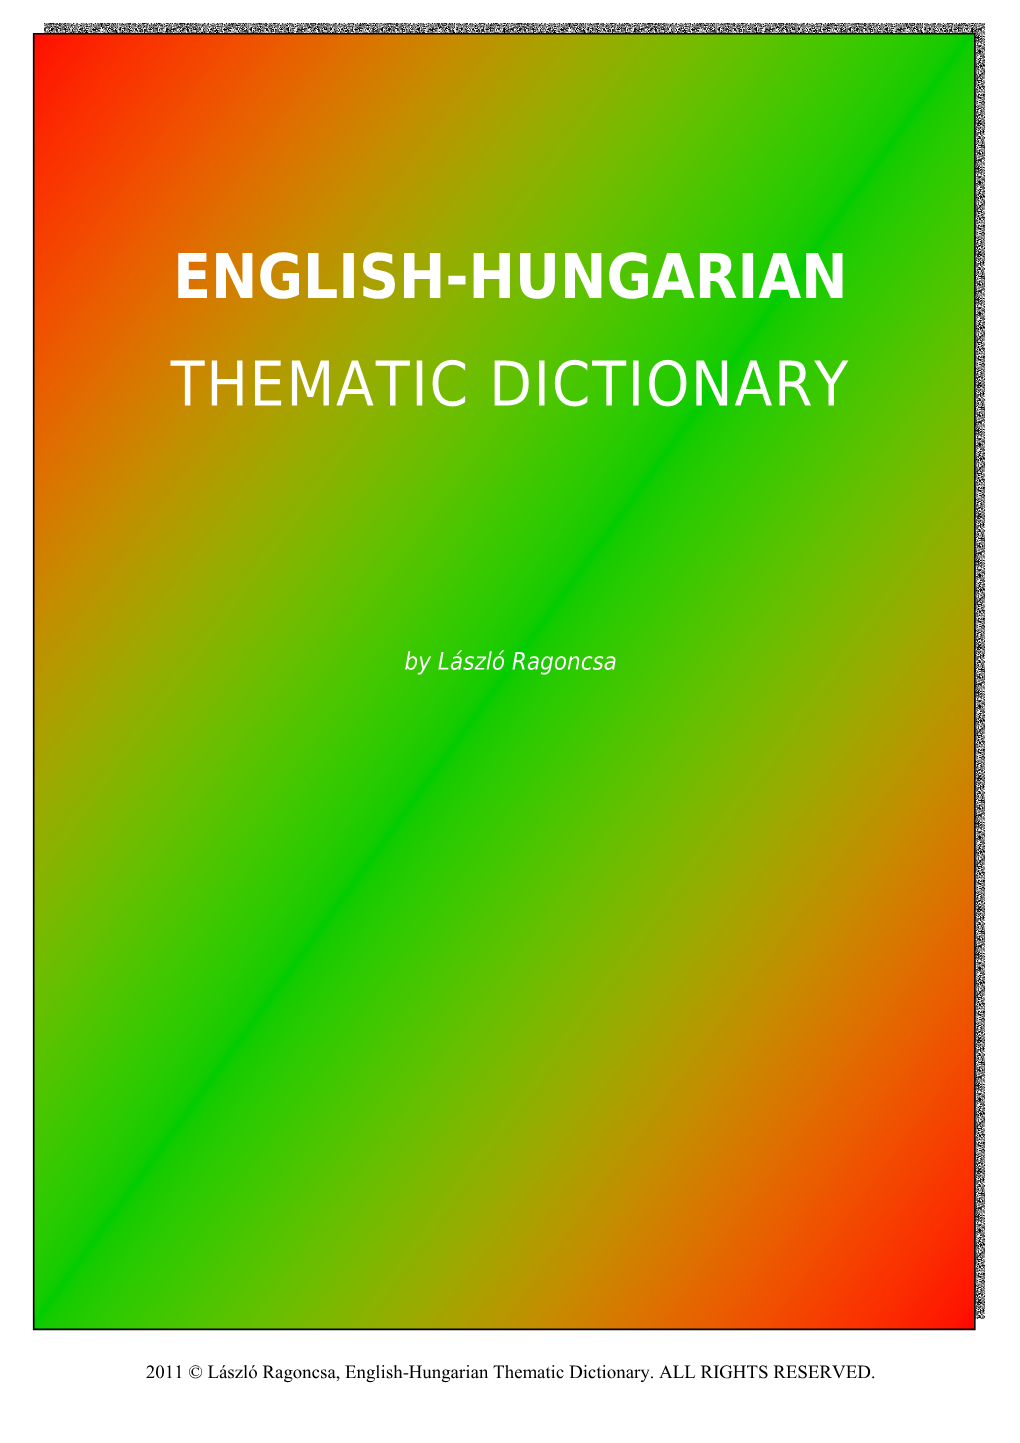 English-Hungarian Thematic Dictionary